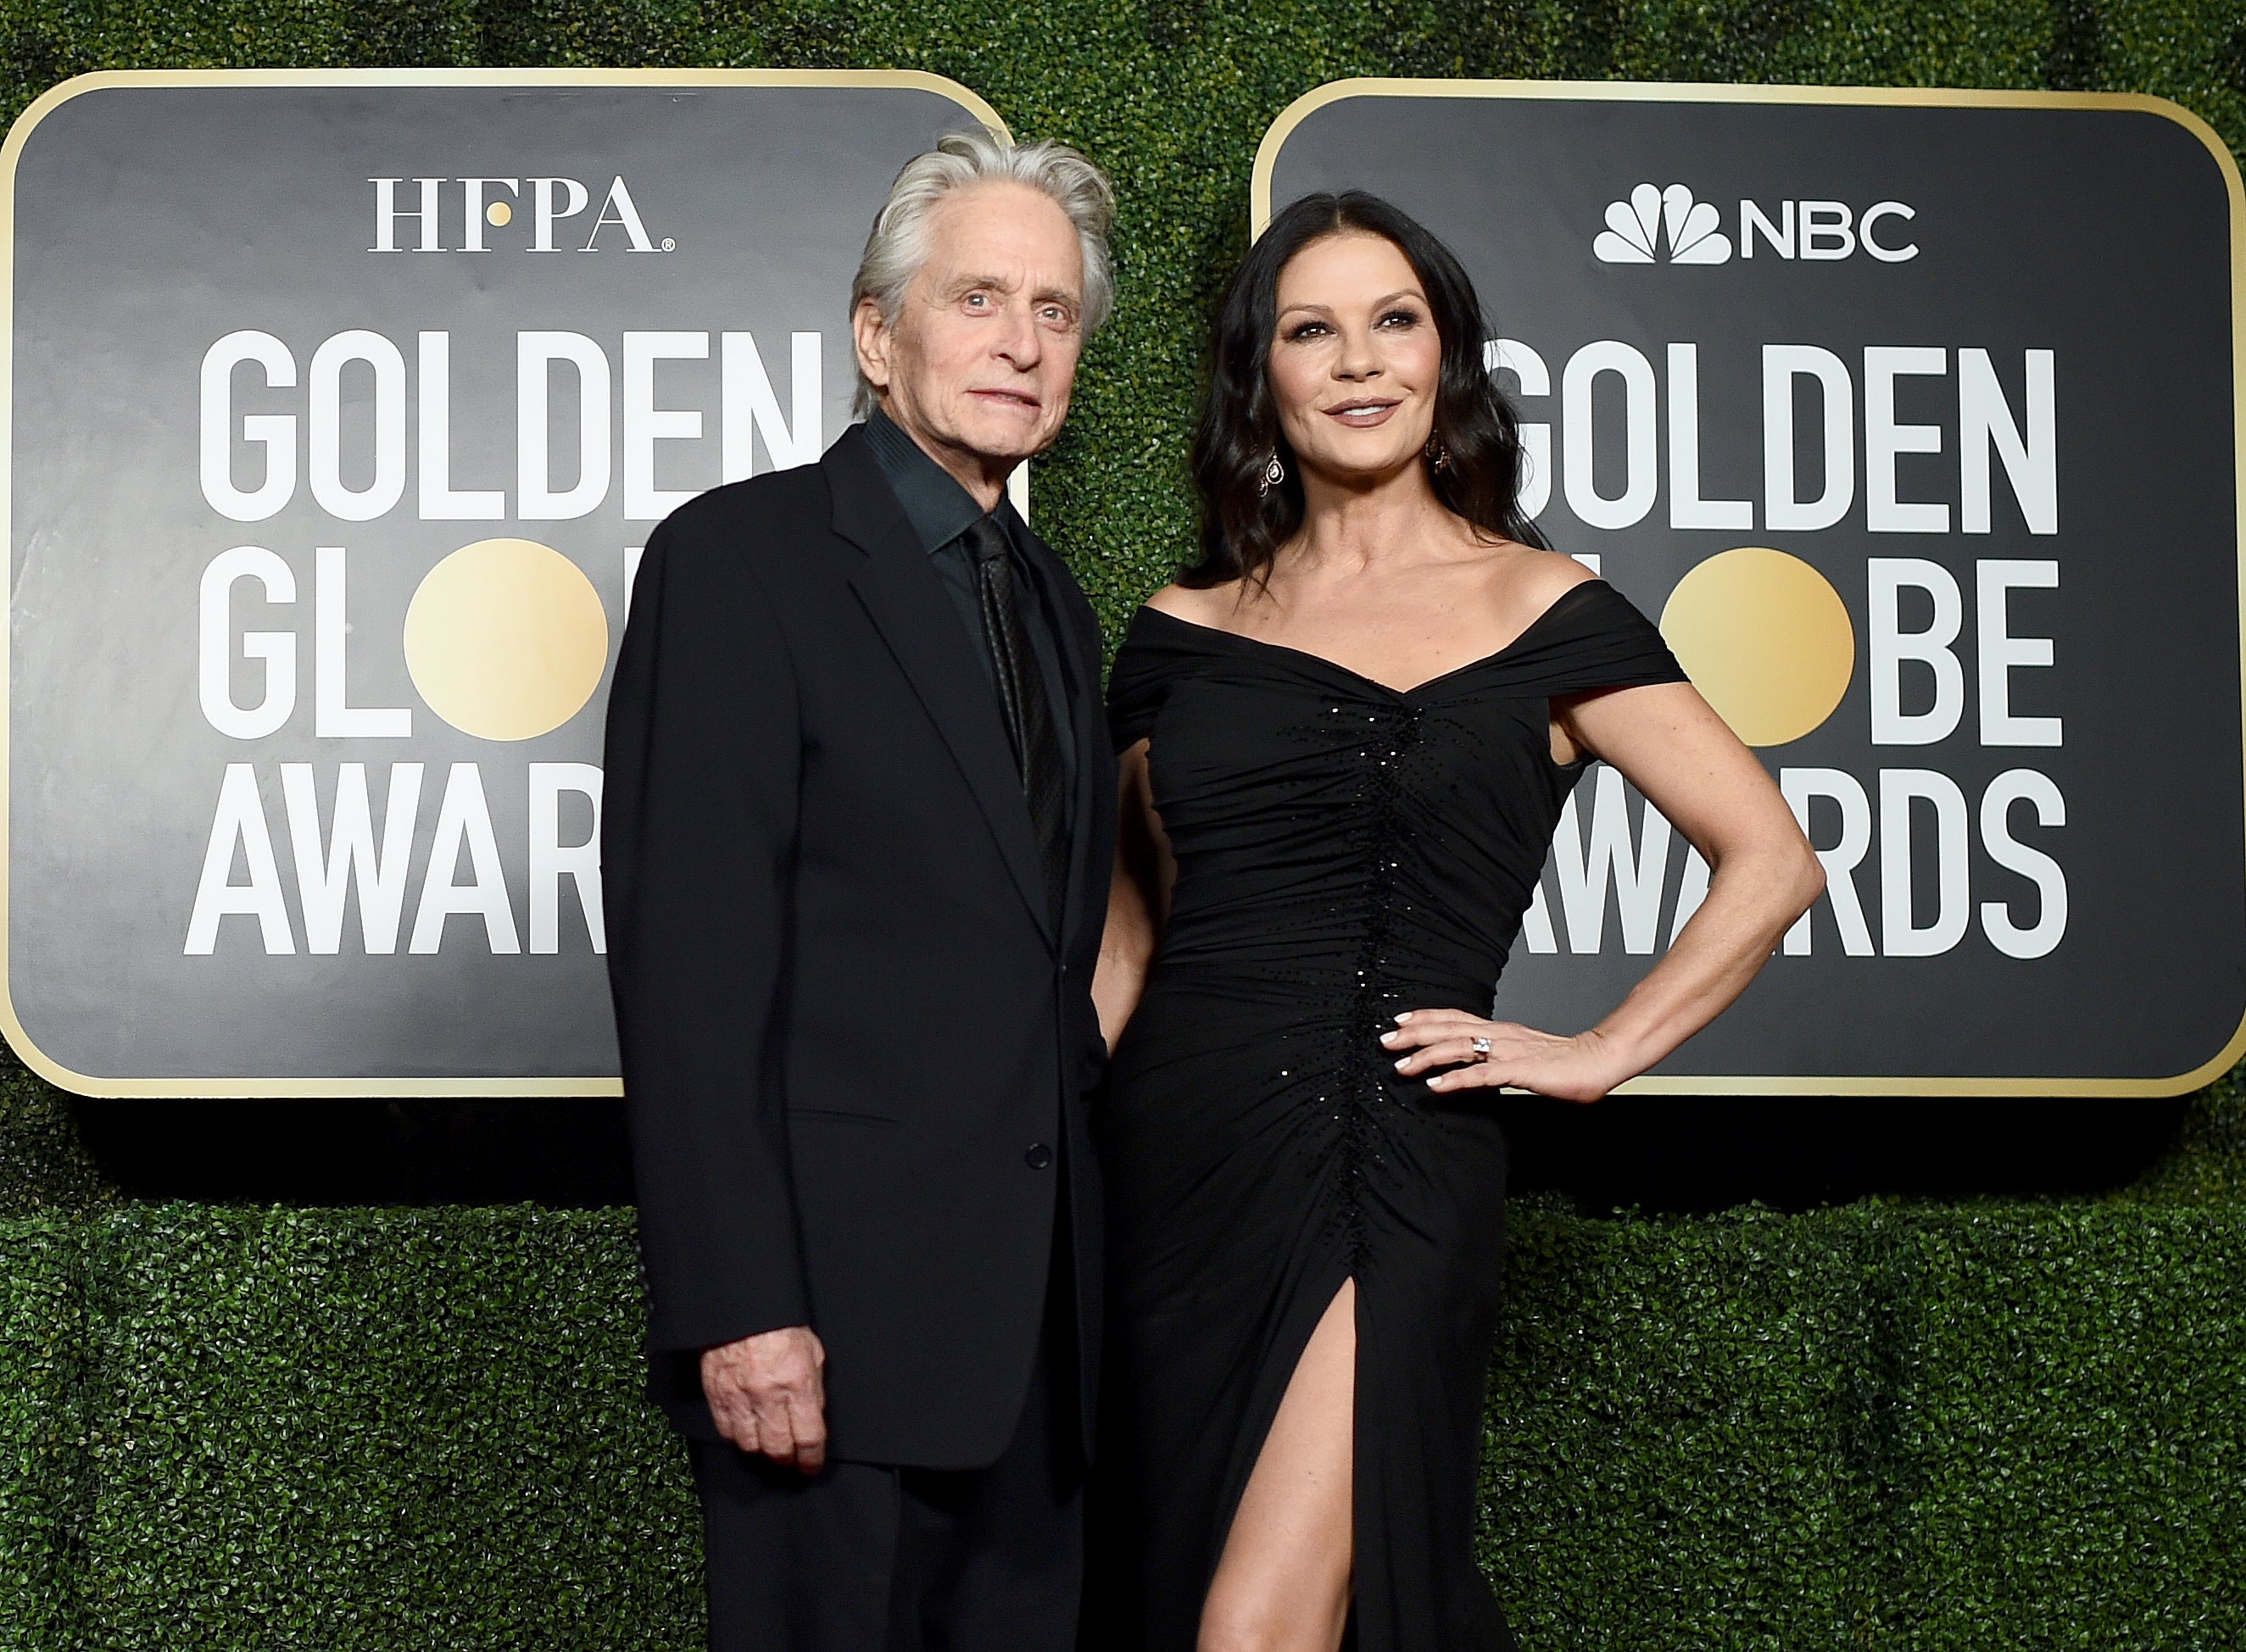 Michael Douglas and Catherine Zeta-Jones celebrated their 22nd wedding anniversary earlier this month